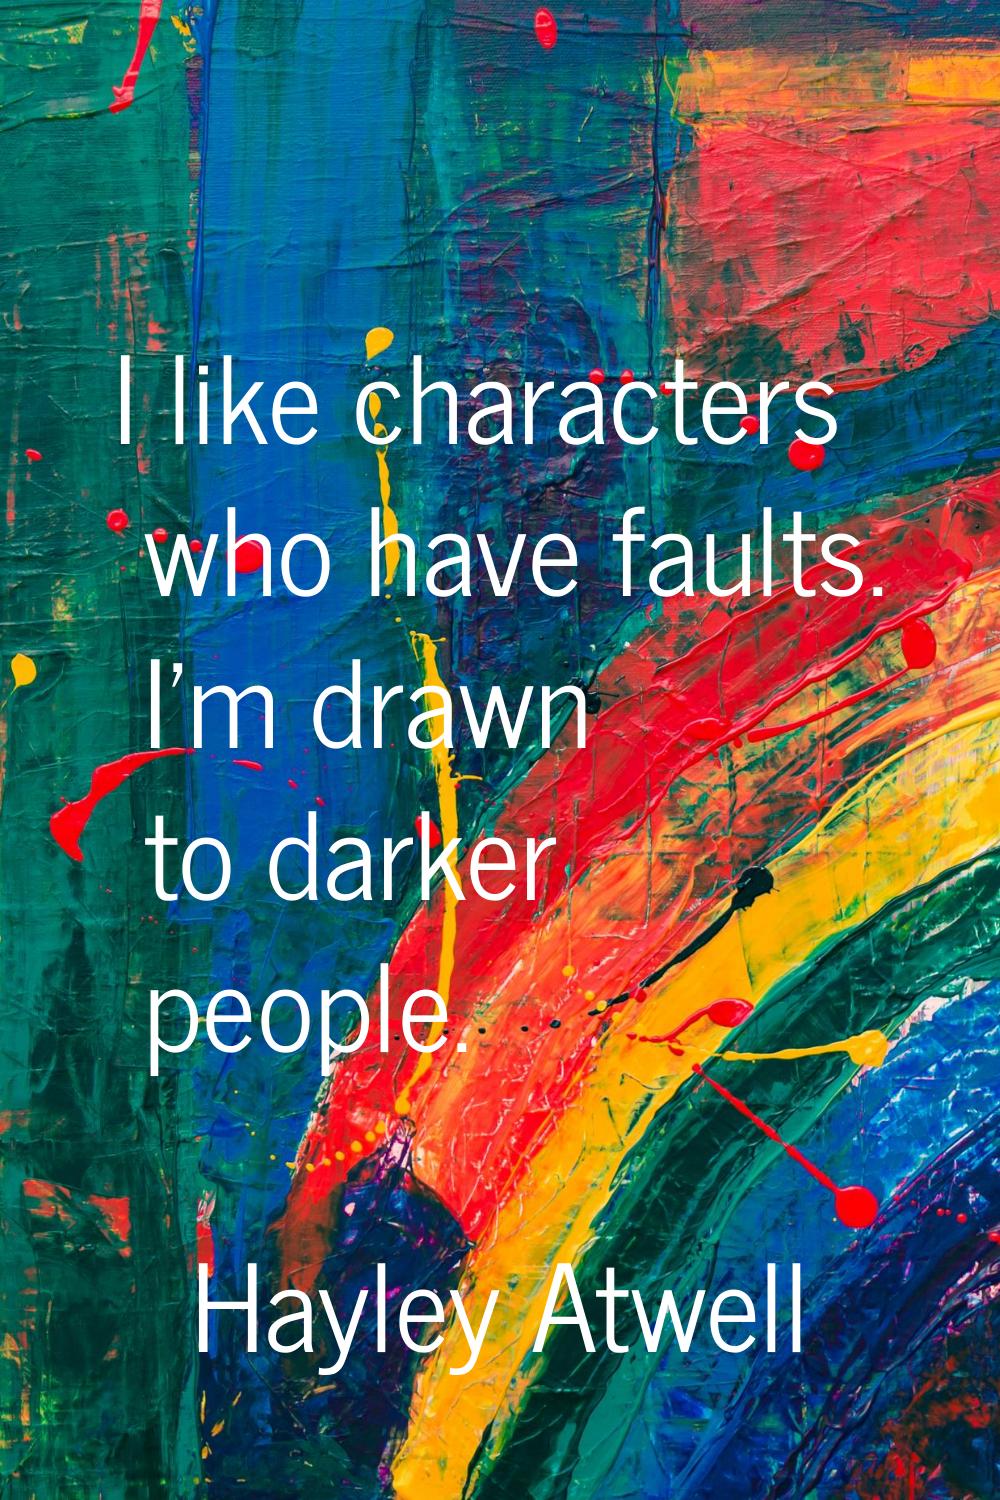 I like characters who have faults. I'm drawn to darker people.